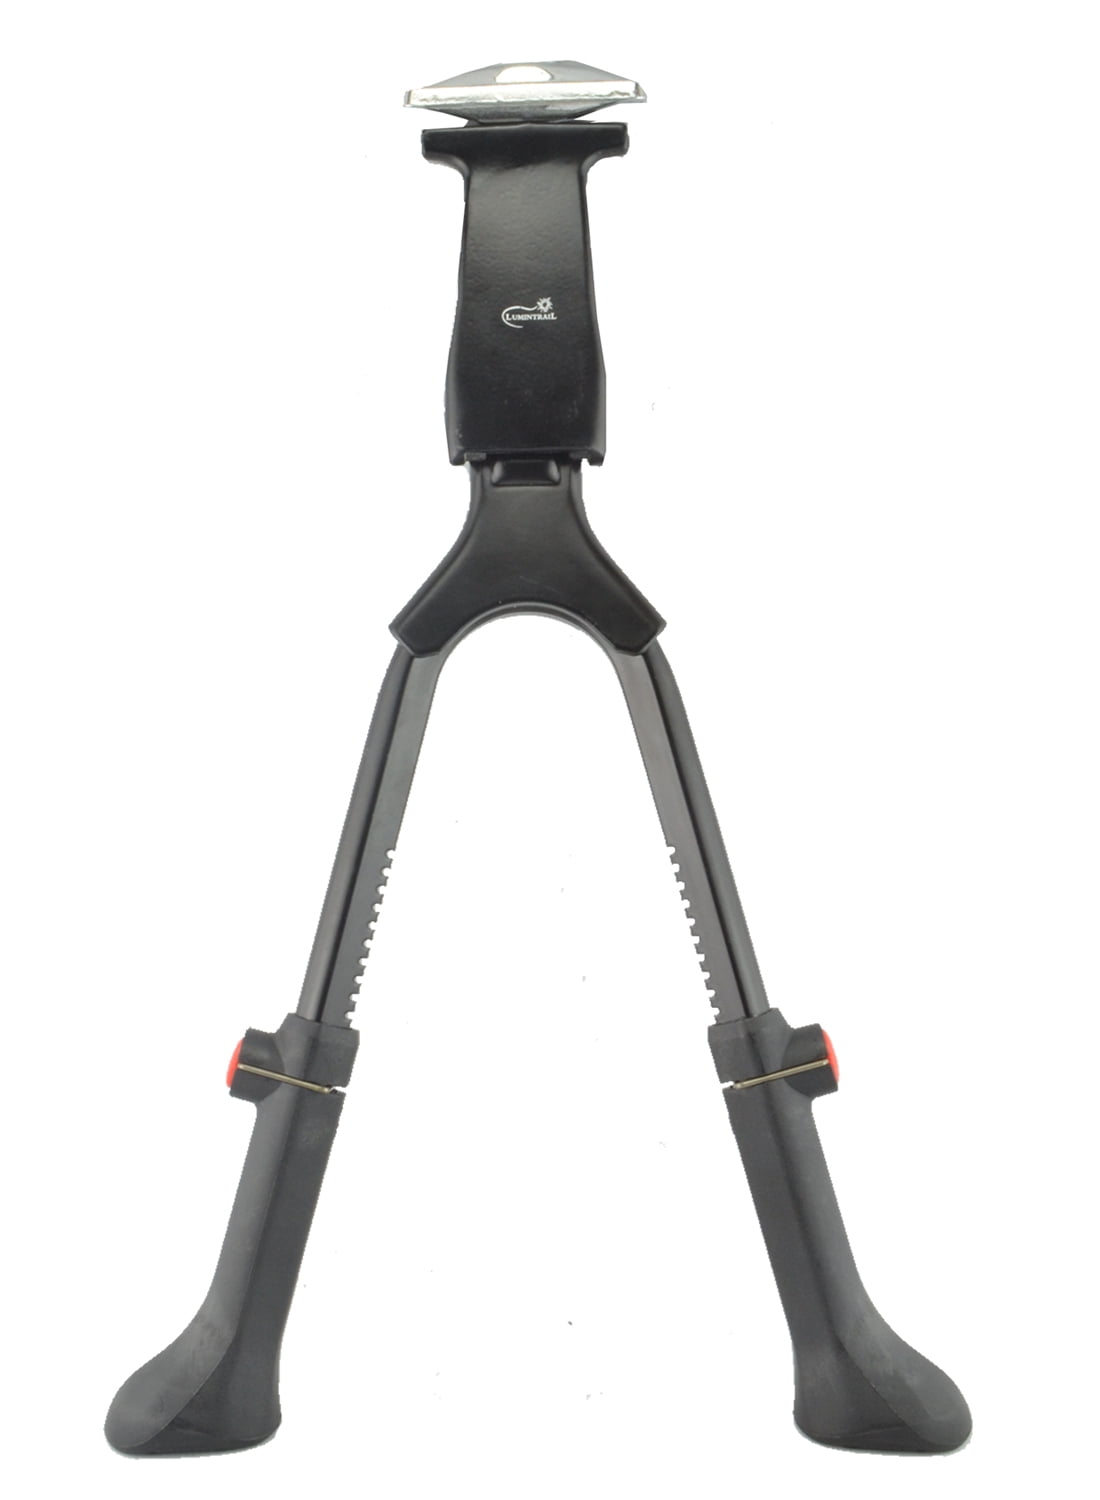 Lumintrail Center Mount Bike Kickstand Adjustable Height fits Most 24” 26” 28” 700c Bicycles 